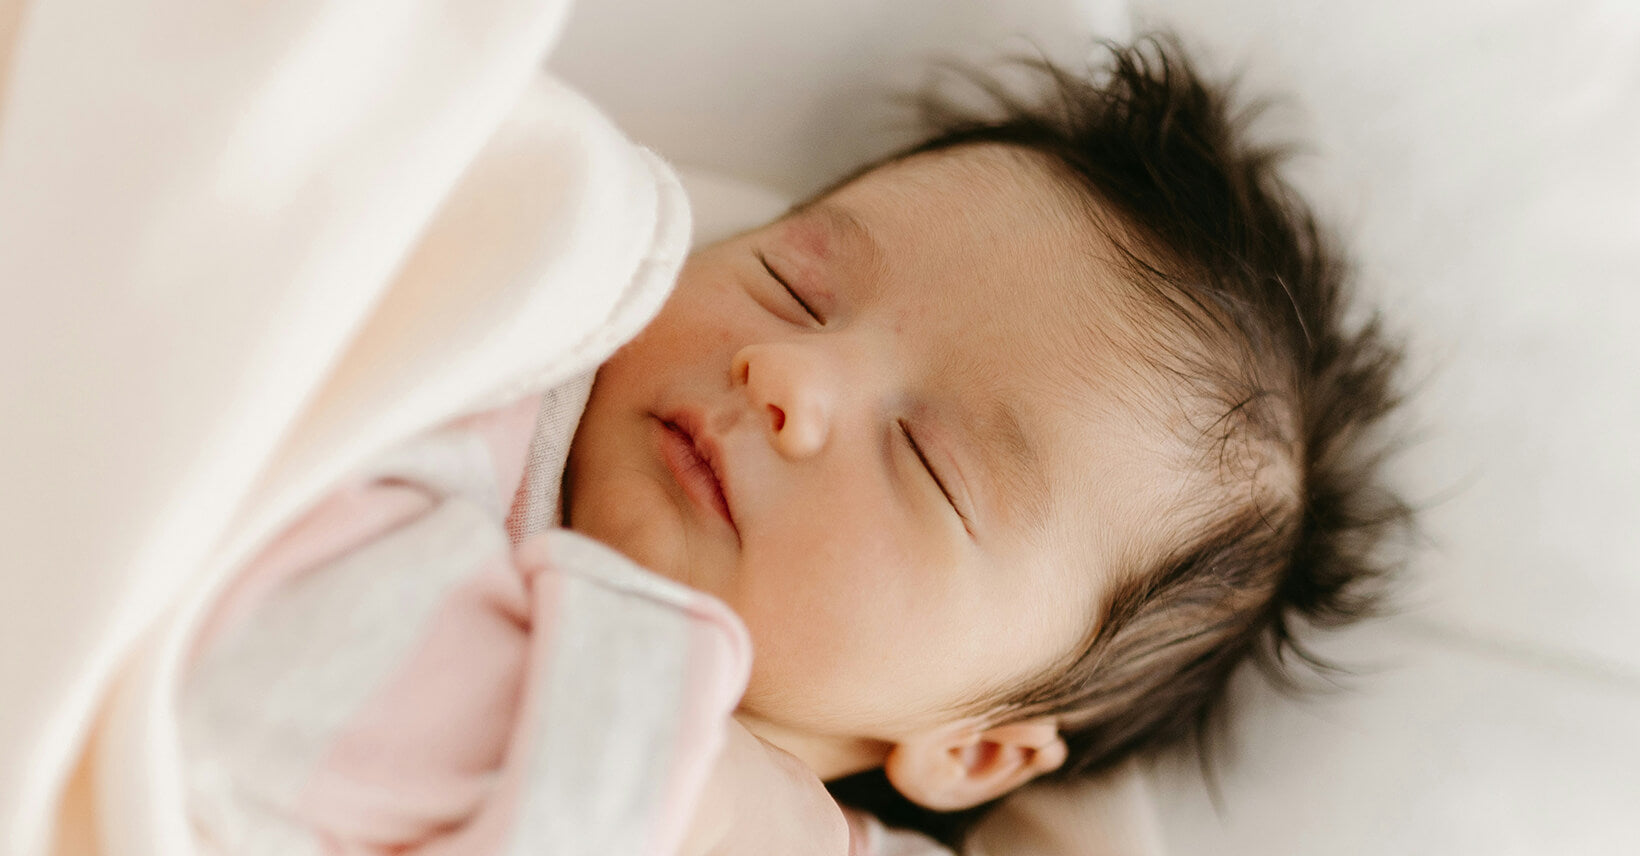 When Should I Worry About a Sleepy Baby